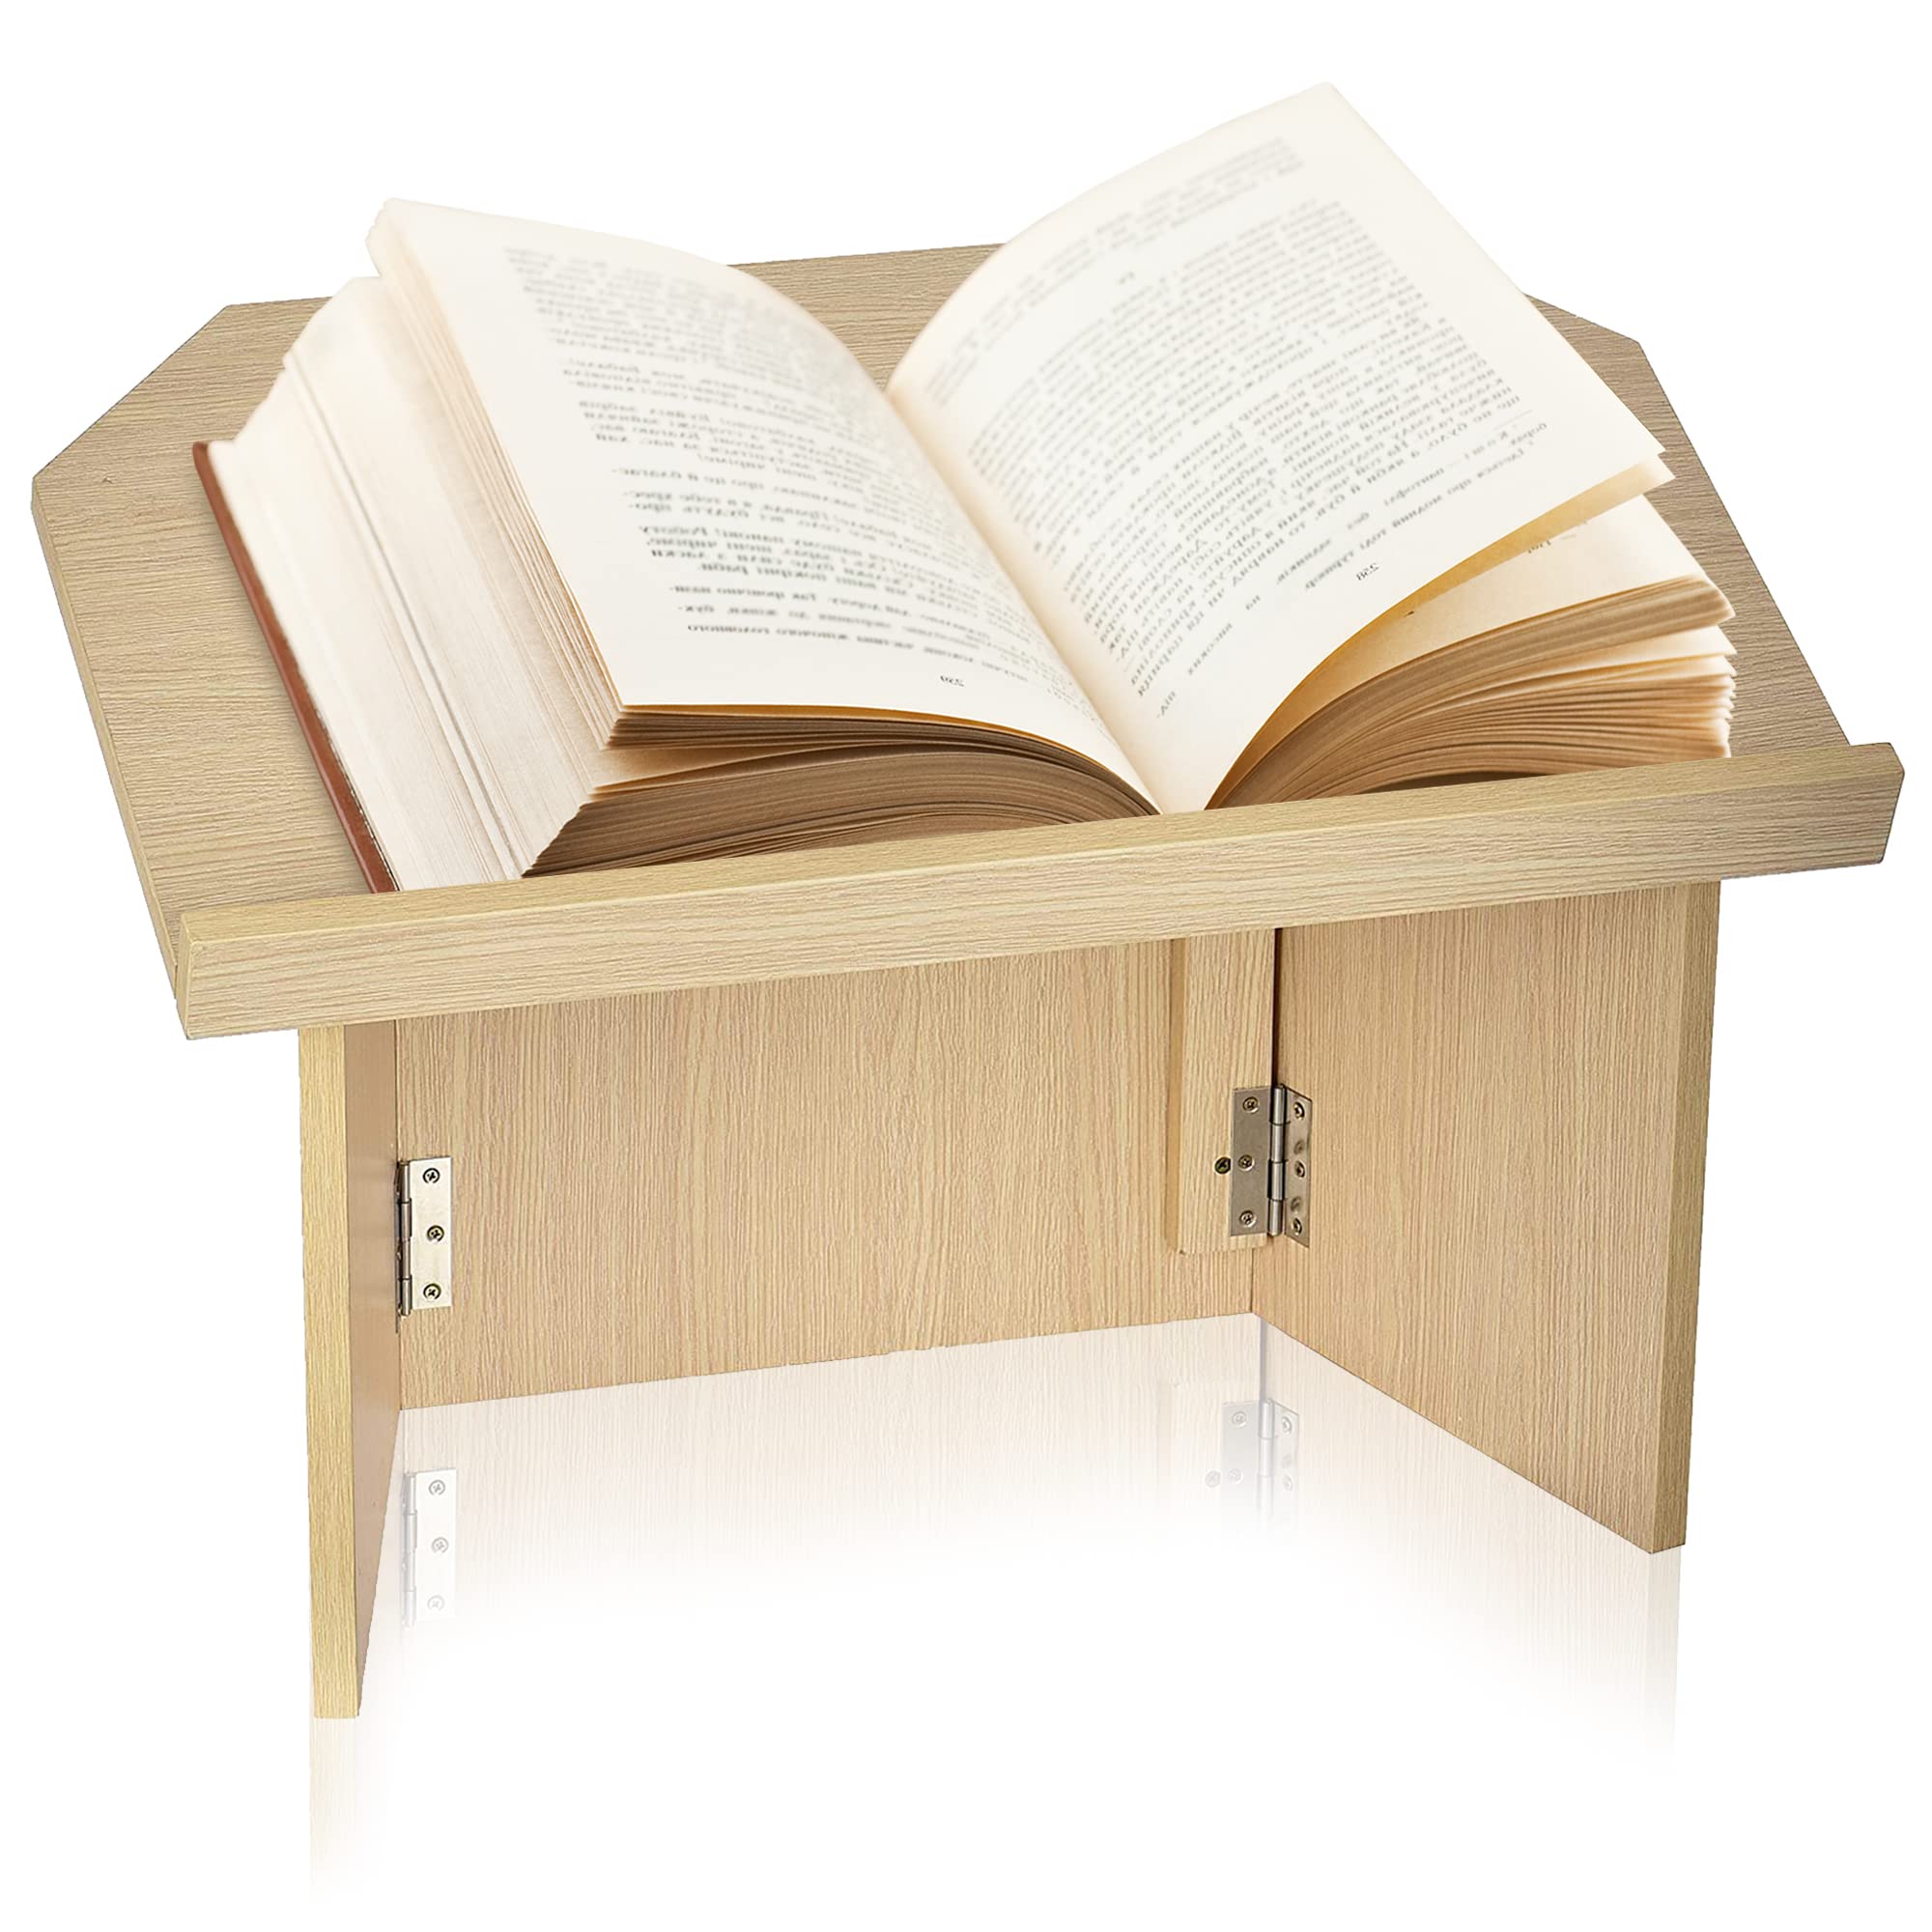 AdirOffice Stand up, Floor-Standing Podium, Lectern with Adjustable Shelf and Pen/Pencil Tray (Beige)  - Very Good